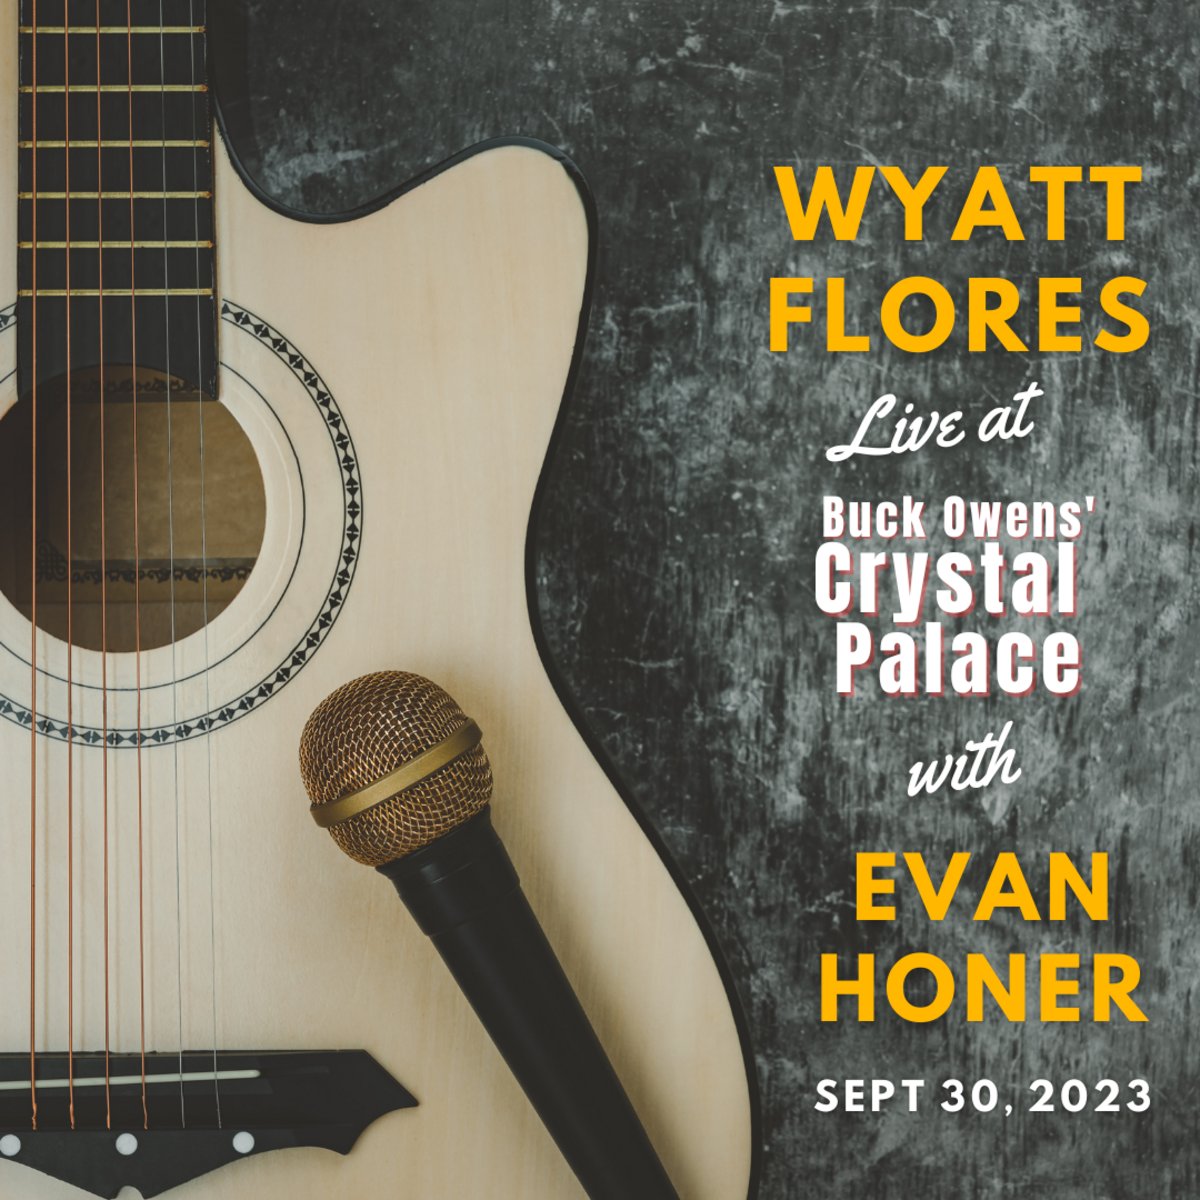 Oklahoma-based singer-songwriter #WyattFlores is bringing his Times Are Getting Hard Tour to #BuckOwensCrystalPalace on September 30, 2023, with special guest #EvanHoner. It'll be a night of great music and thoughtful storytelling. Get tickets at: bit.ly/3YAHIbo